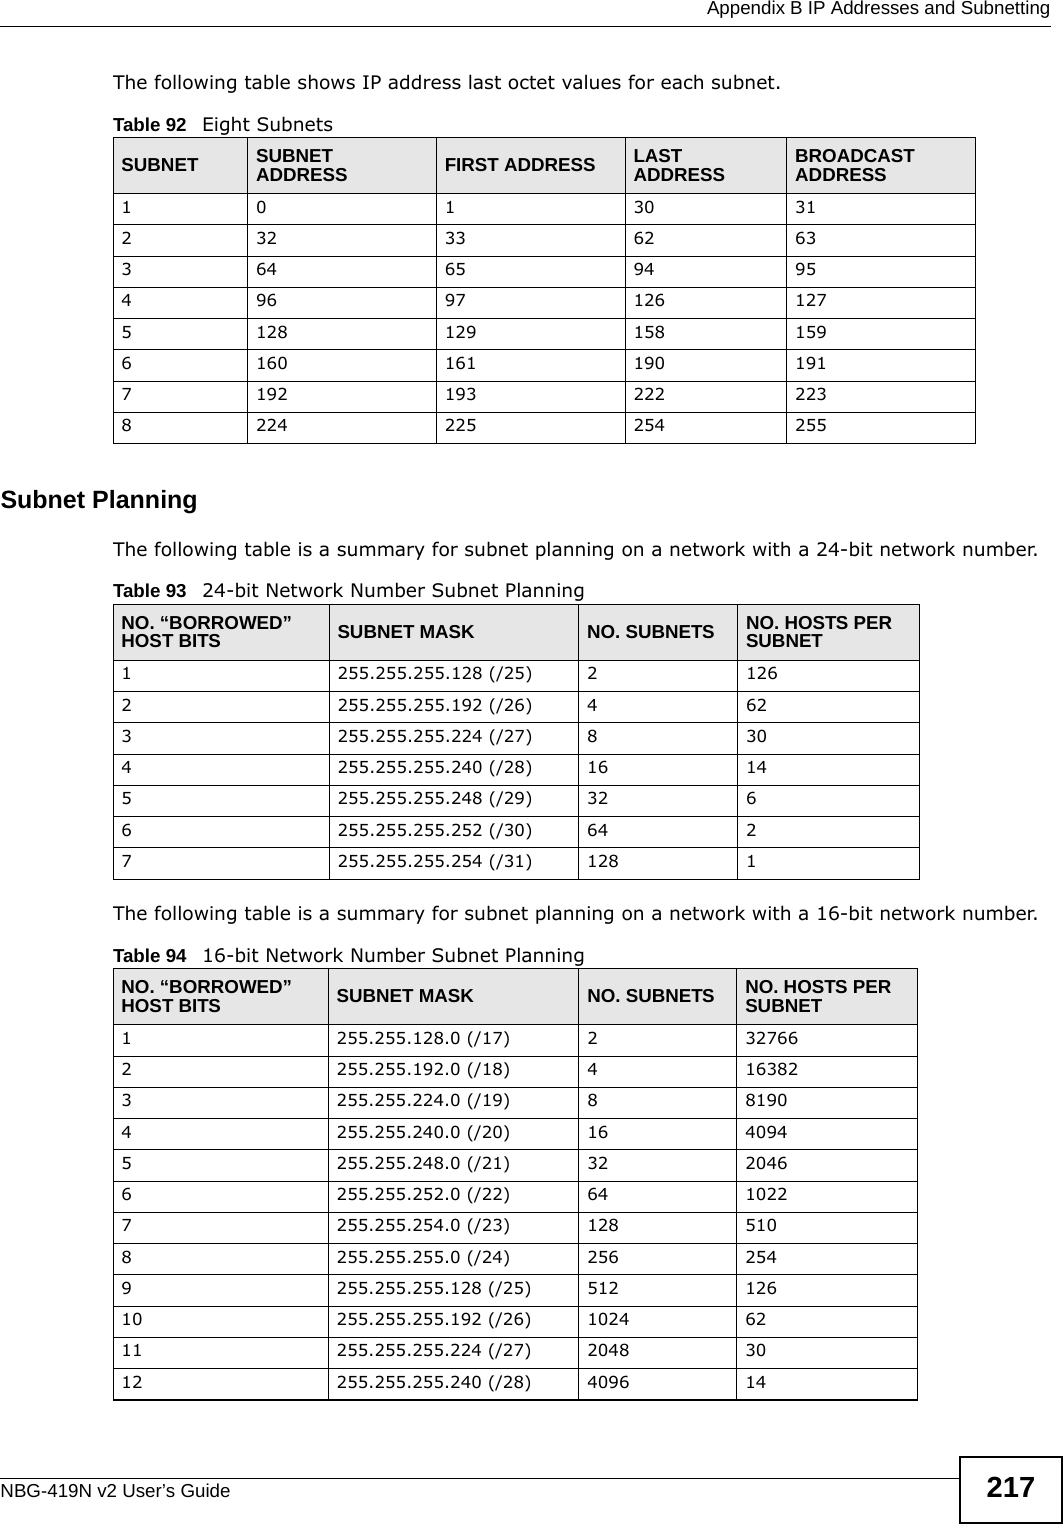  Appendix B IP Addresses and SubnettingNBG-419N v2 User’s Guide 217The following table shows IP address last octet values for each subnet.Subnet PlanningThe following table is a summary for subnet planning on a network with a 24-bit network number.The following table is a summary for subnet planning on a network with a 16-bit network number. Table 92   Eight SubnetsSUBNET SUBNET ADDRESS FIRST ADDRESS LAST ADDRESS BROADCAST ADDRESS1 0 1 30 31232 33 62 63364 65 94 95496 97 126 1275128 129 158 1596160 161 190 1917192 193 222 2238224 225 254 255Table 93   24-bit Network Number Subnet PlanningNO. “BORROWED” HOST BITS SUBNET MASK NO. SUBNETS NO. HOSTS PER SUBNET1255.255.255.128 (/25) 21262255.255.255.192 (/26) 4623255.255.255.224 (/27) 8304255.255.255.240 (/28) 16 145255.255.255.248 (/29) 32 66255.255.255.252 (/30) 64 27255.255.255.254 (/31) 128 1Table 94   16-bit Network Number Subnet PlanningNO. “BORROWED” HOST BITS SUBNET MASK NO. SUBNETS NO. HOSTS PER SUBNET1255.255.128.0 (/17) 2327662255.255.192.0 (/18) 4163823255.255.224.0 (/19) 881904255.255.240.0 (/20) 16 40945255.255.248.0 (/21) 32 20466255.255.252.0 (/22) 64 10227255.255.254.0 (/23) 128 5108255.255.255.0 (/24) 256 2549255.255.255.128 (/25) 512 12610 255.255.255.192 (/26) 1024 6211 255.255.255.224 (/27) 2048 3012 255.255.255.240 (/28) 4096 14